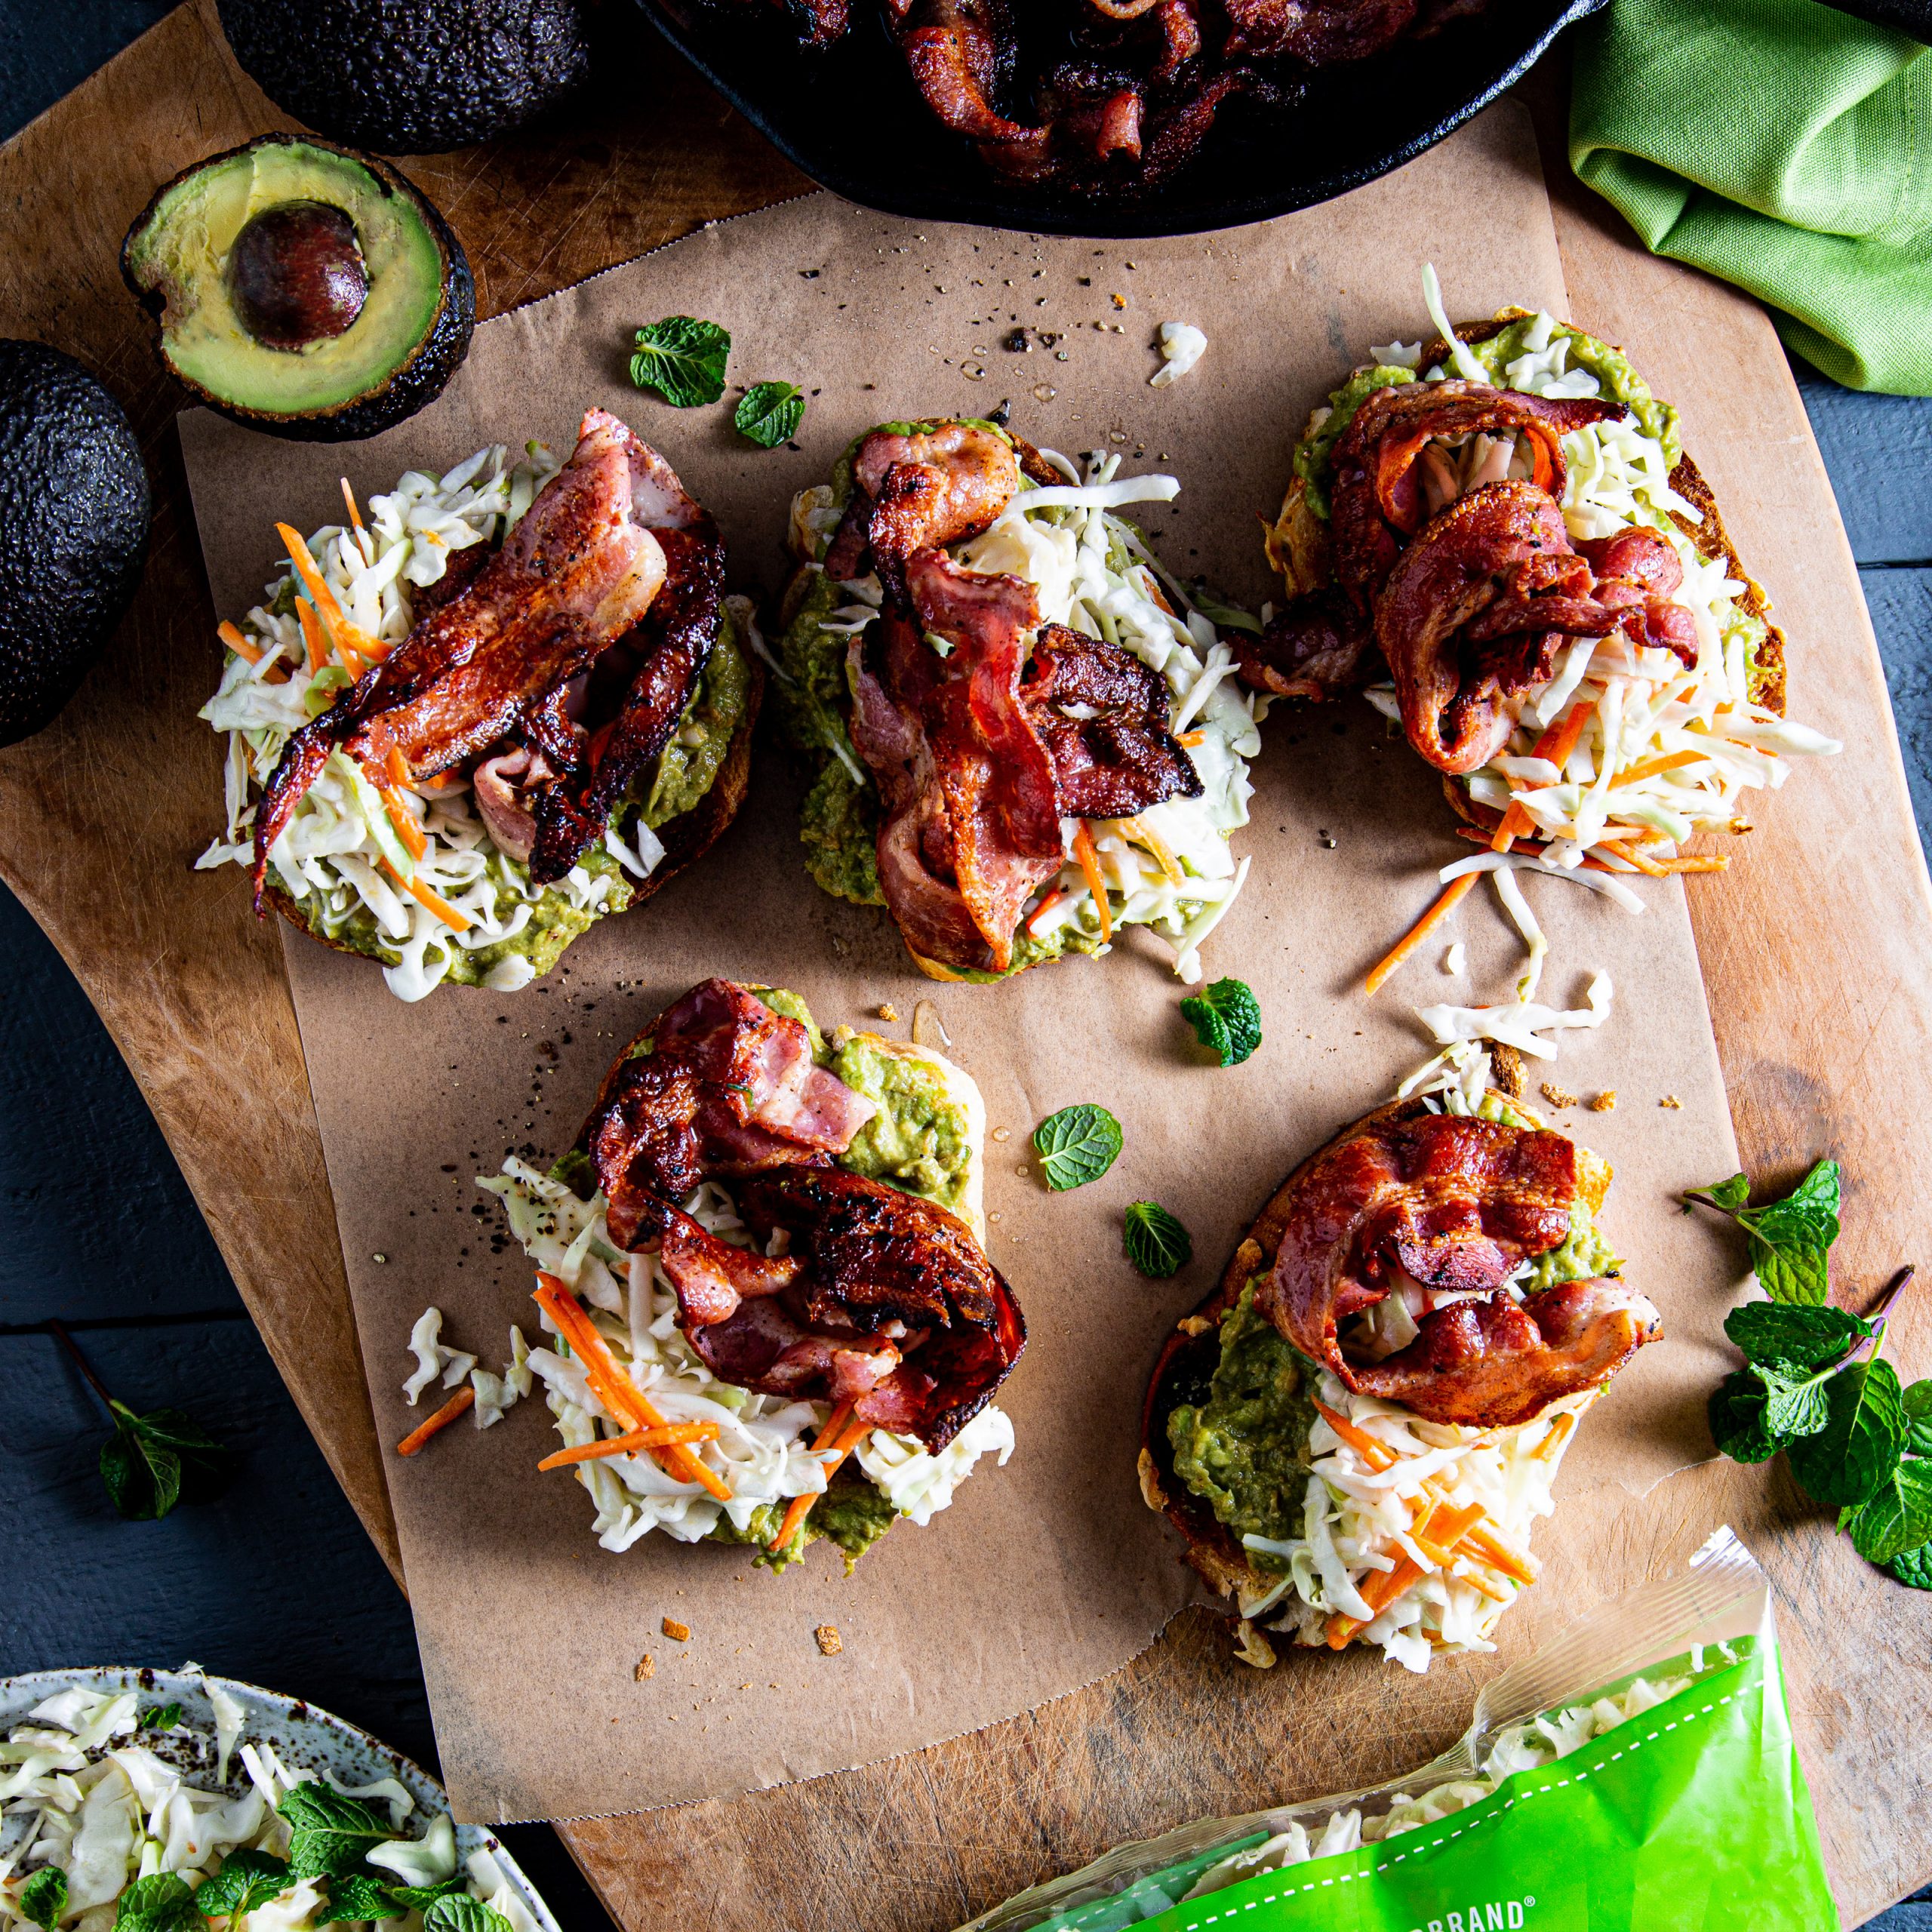 Coleslaw and bacon open sandwiches